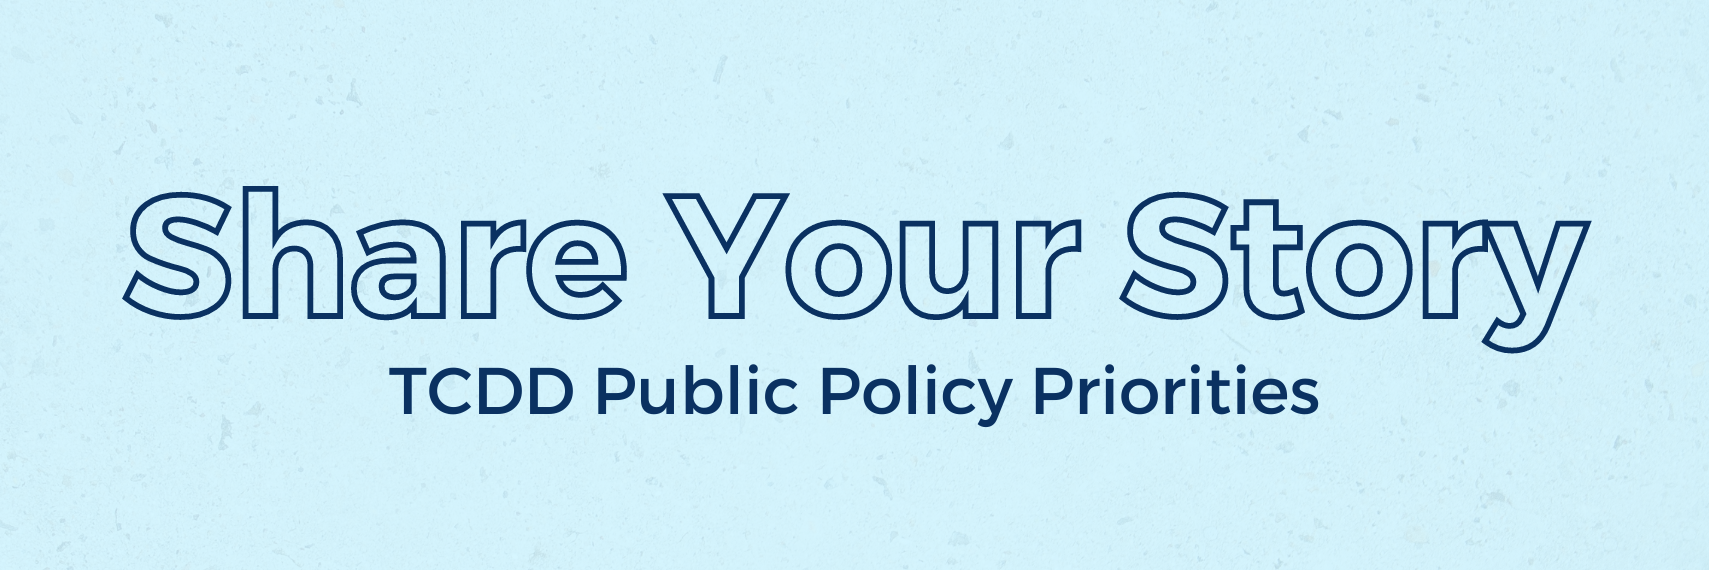 Share Your Story: TCDD Public Policy Priorities